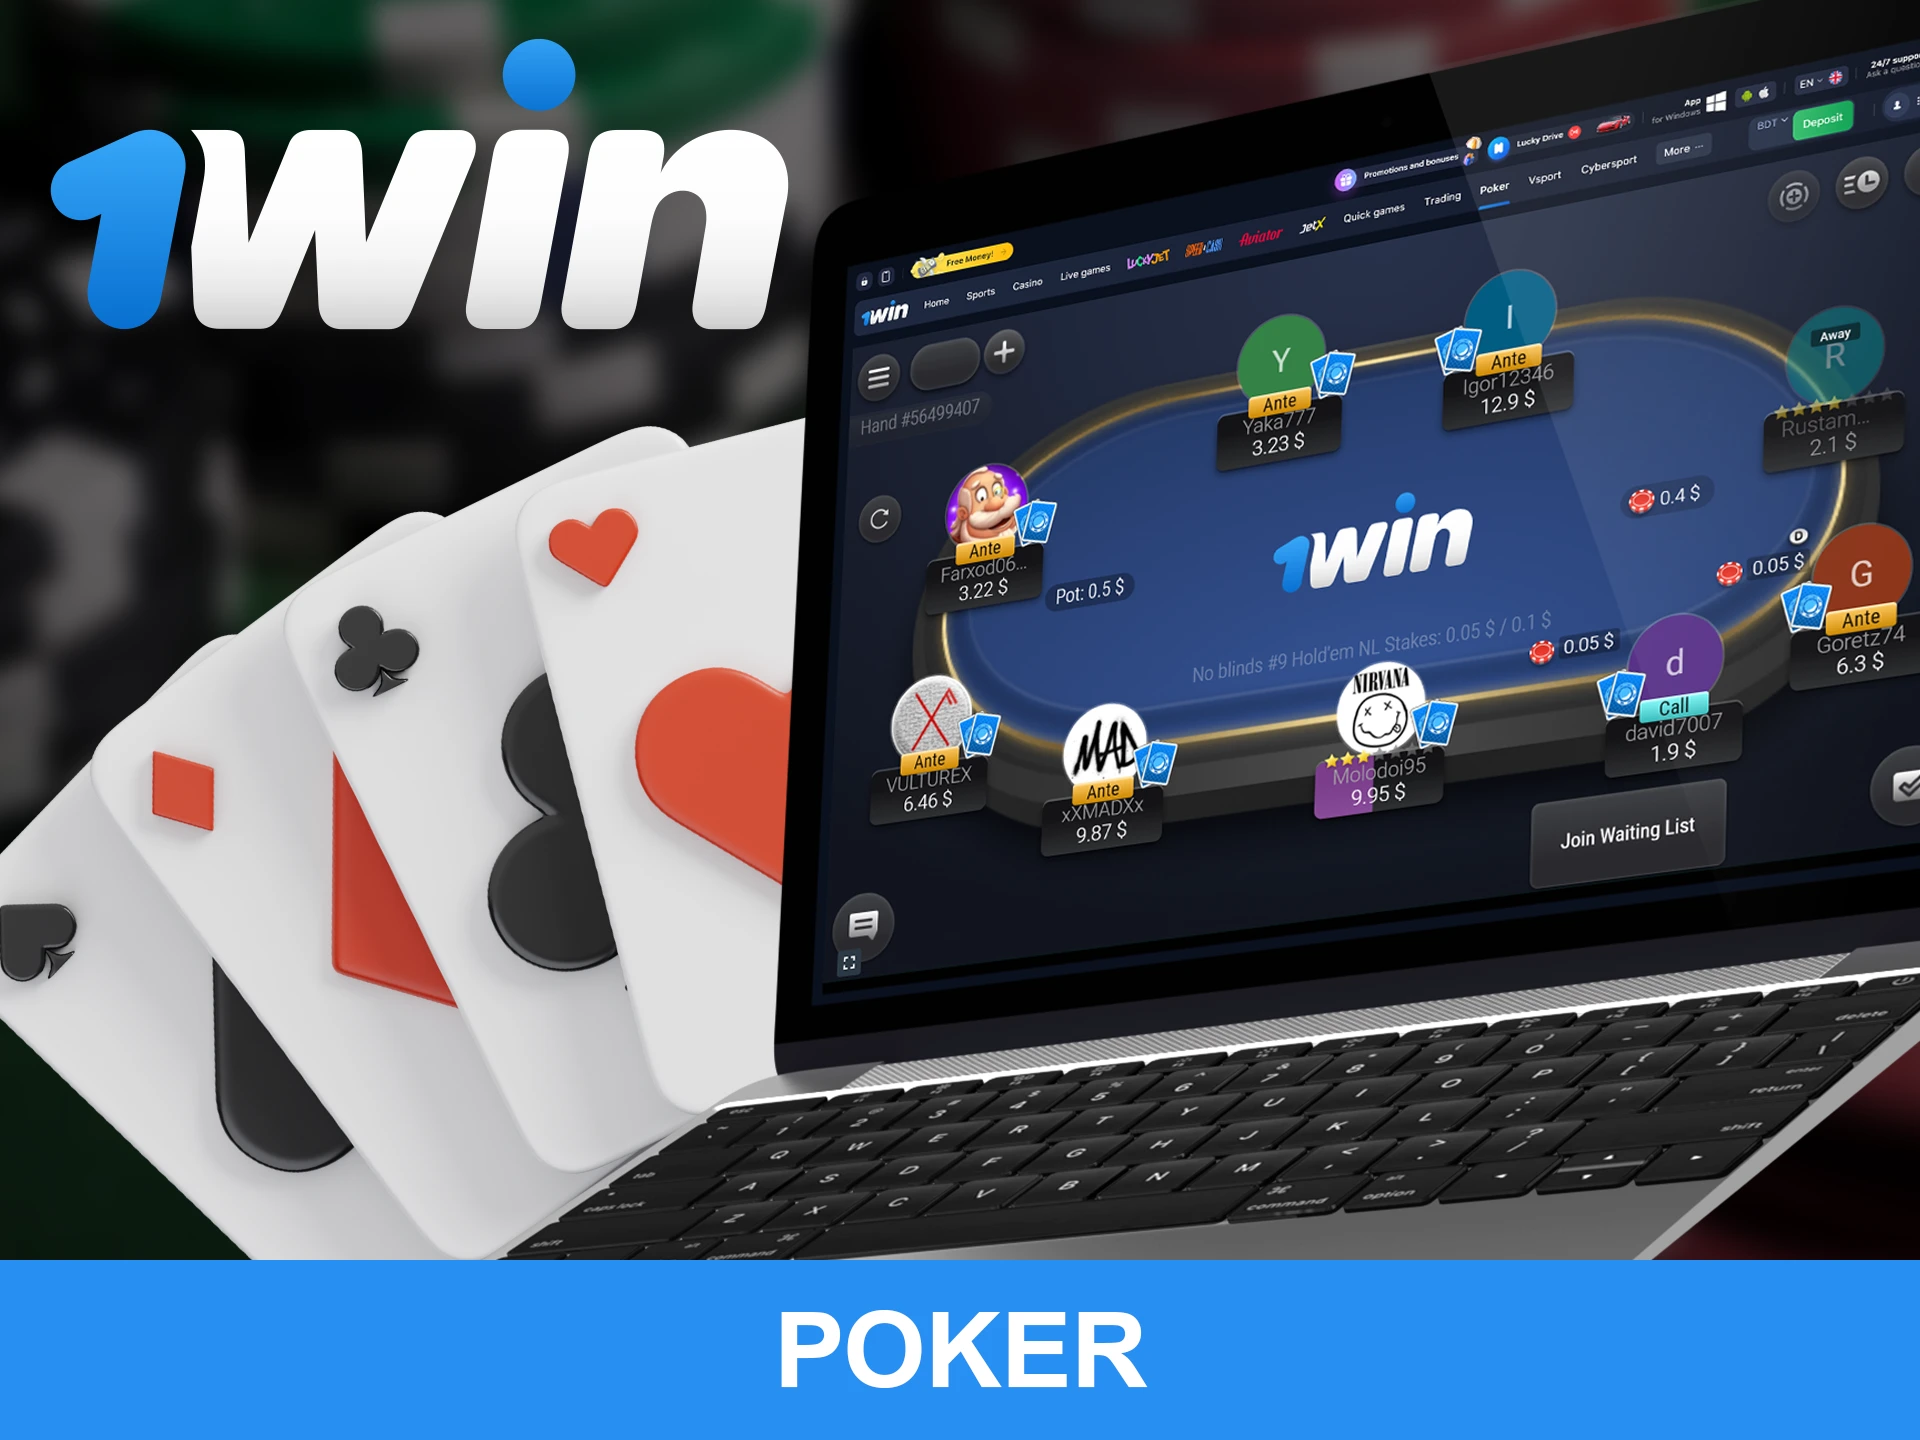 Put together the right combination to become a poker winner at 1win.